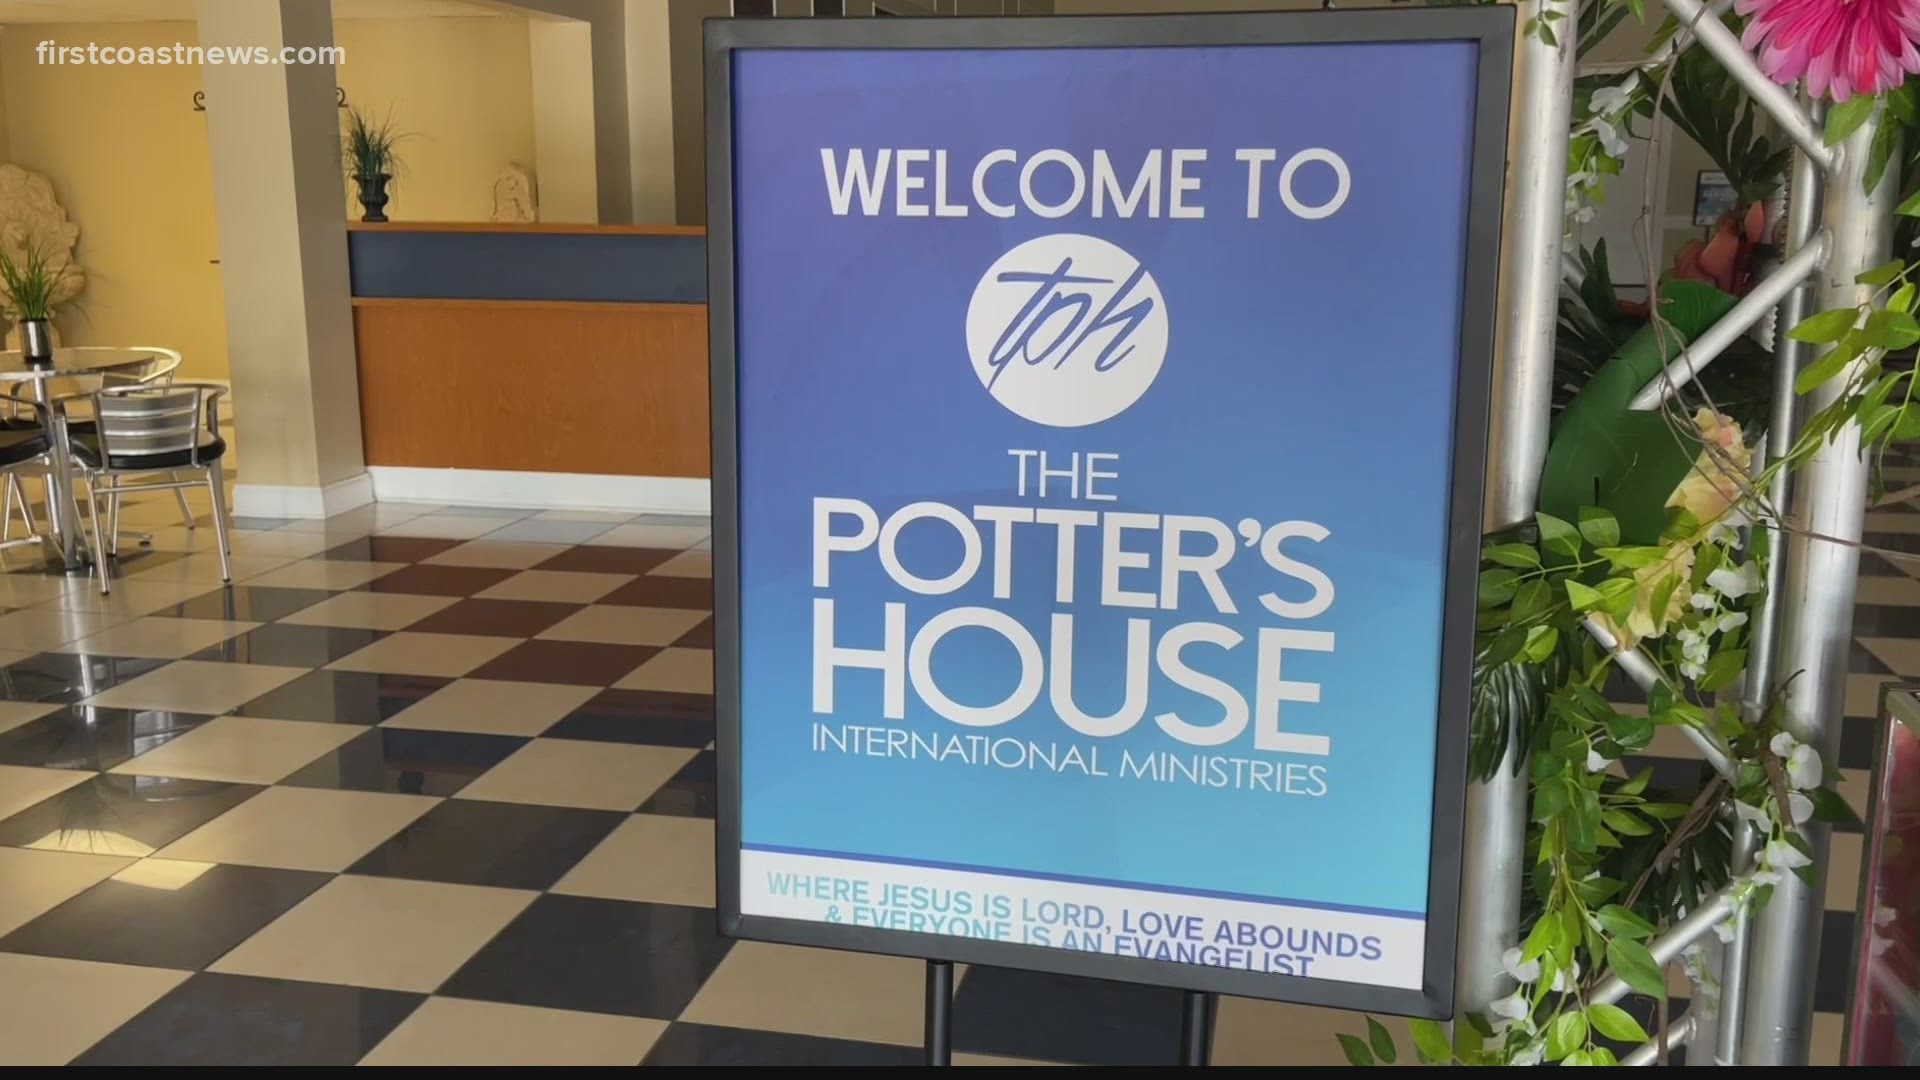 The Potter's House on the westside will be home to the city's latest Cure Violence effort.